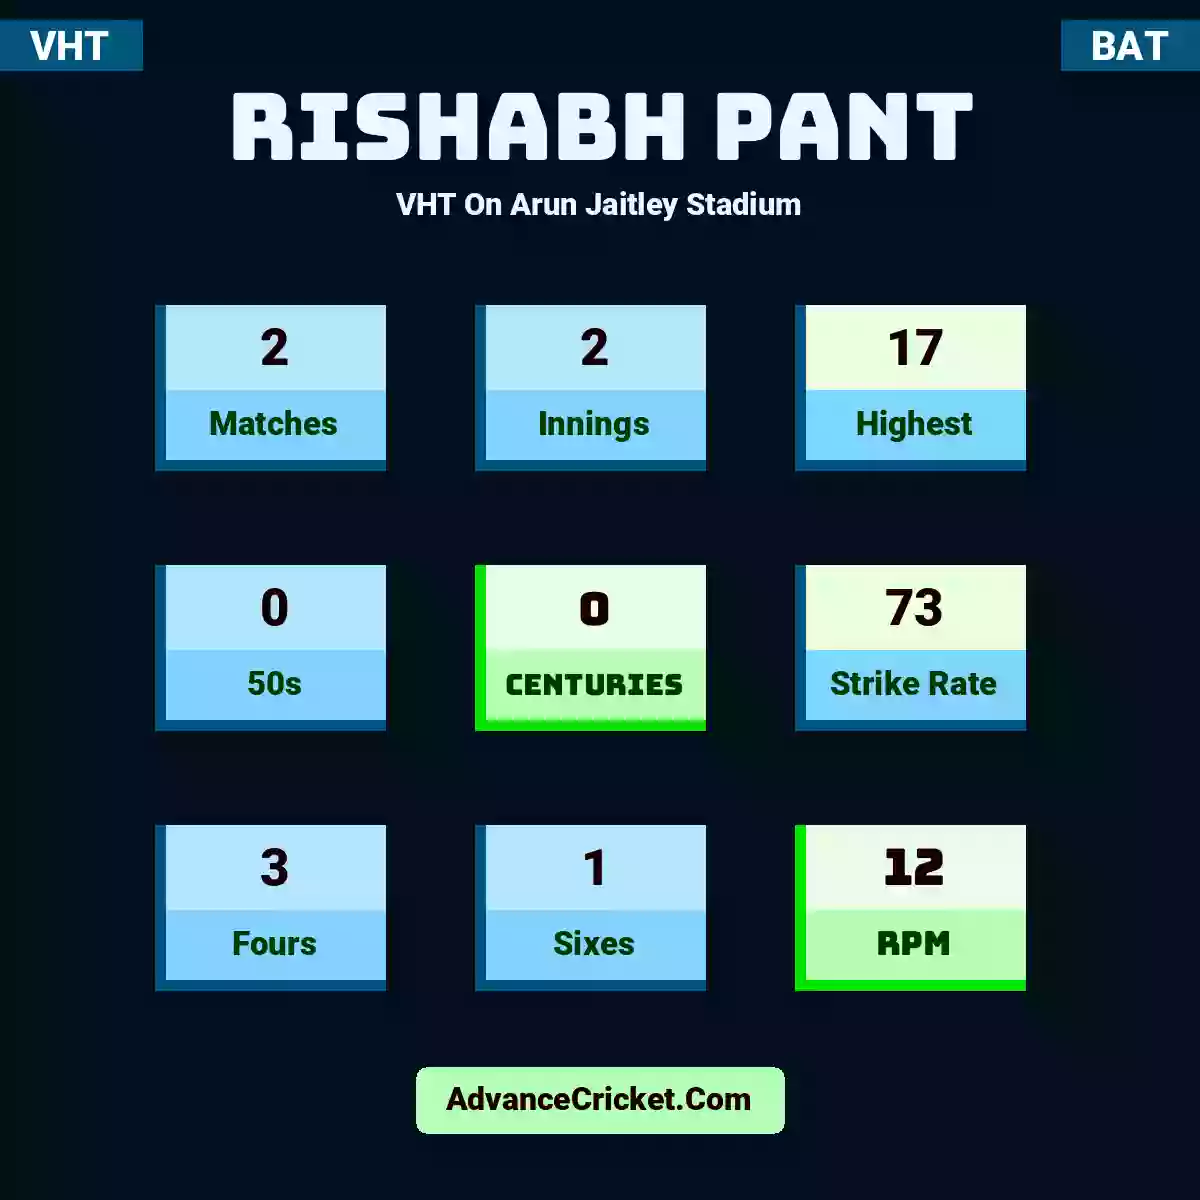 Rishabh Pant VHT  On Arun Jaitley Stadium, Rishabh Pant played 2 matches, scored 17 runs as highest, 0 half-centuries, and 0 centuries, with a strike rate of 73. R.Pant hit 3 fours and 1 sixes, with an RPM of 12.